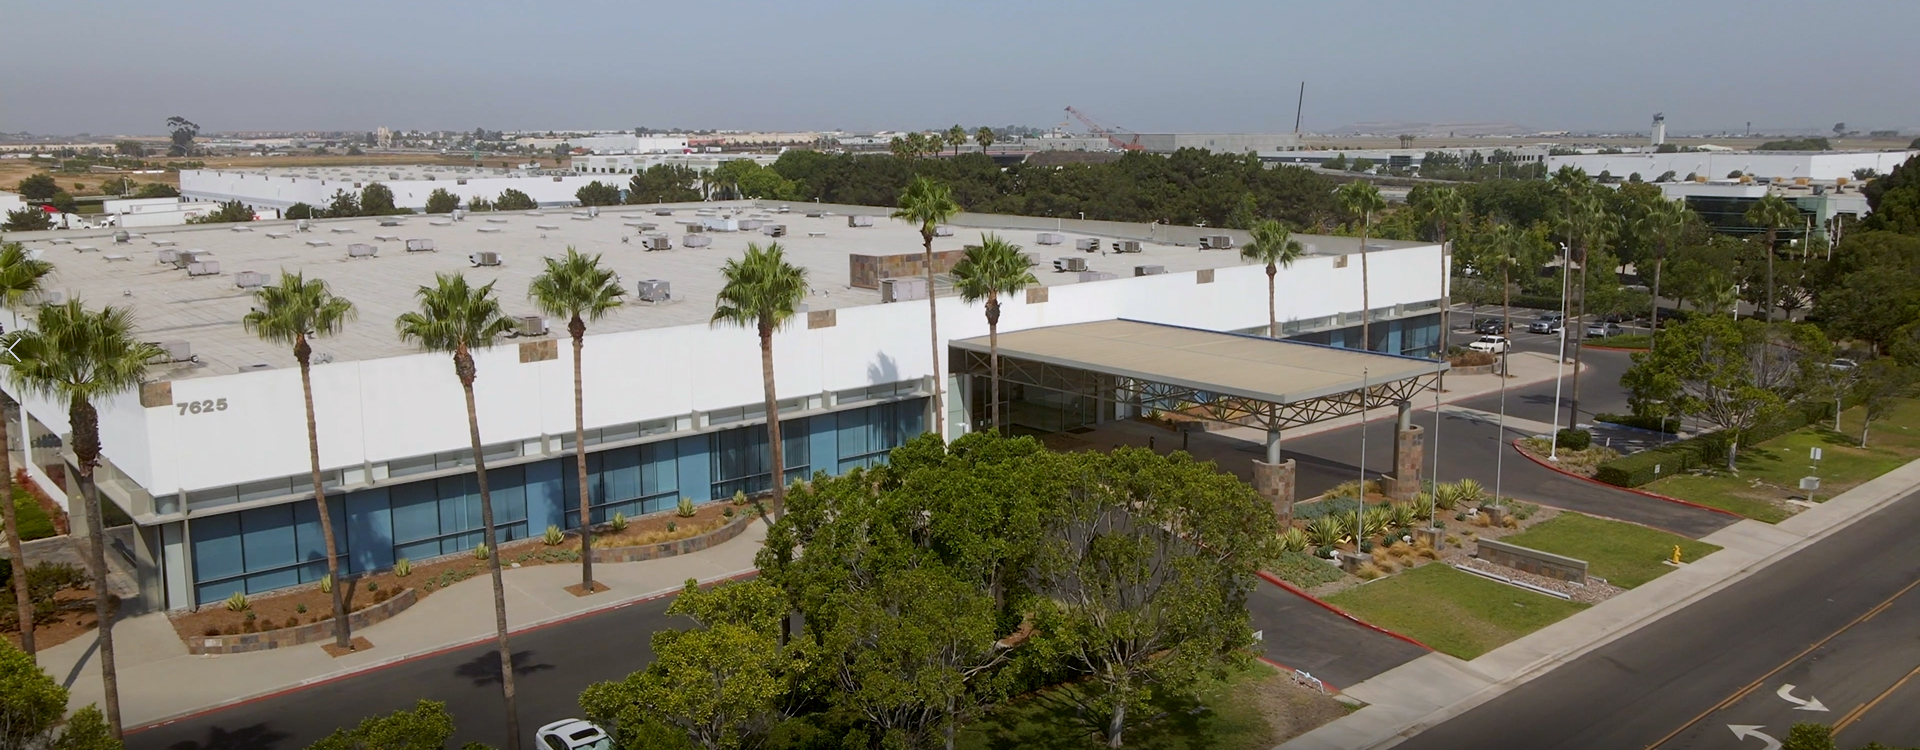 Rock West Composites’ new headquarters in San Diego, California.